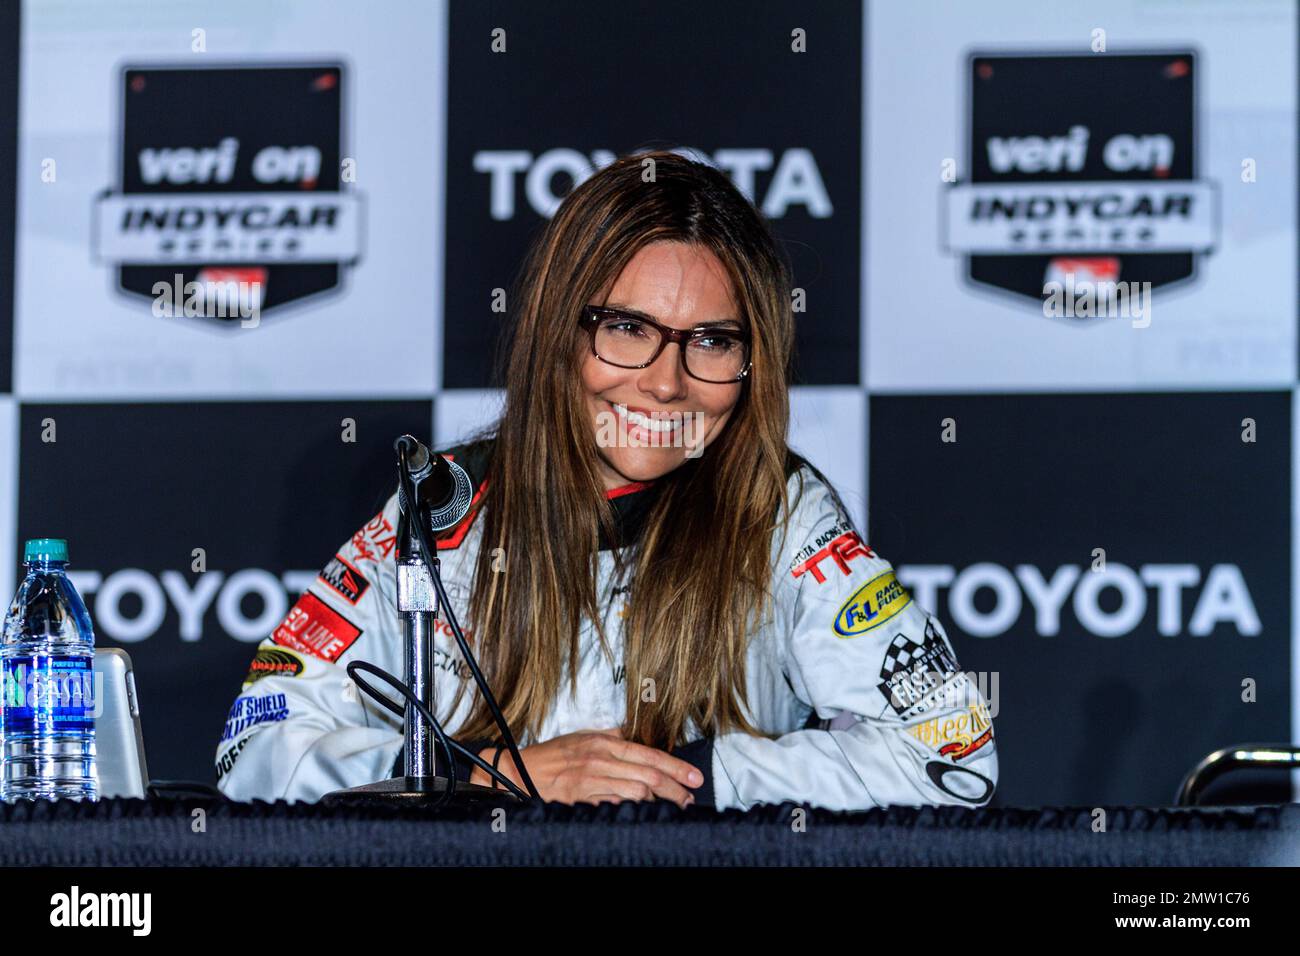 American actress Vanessa Marcil fields questions for the press after qualifying run. She finished 15th with her best lap time of 1:57.368 at the 2014 Toyota Celebrity/PRO Race practice and qualifying. Long Beach, CA. 11th April 2014. Stock Photo